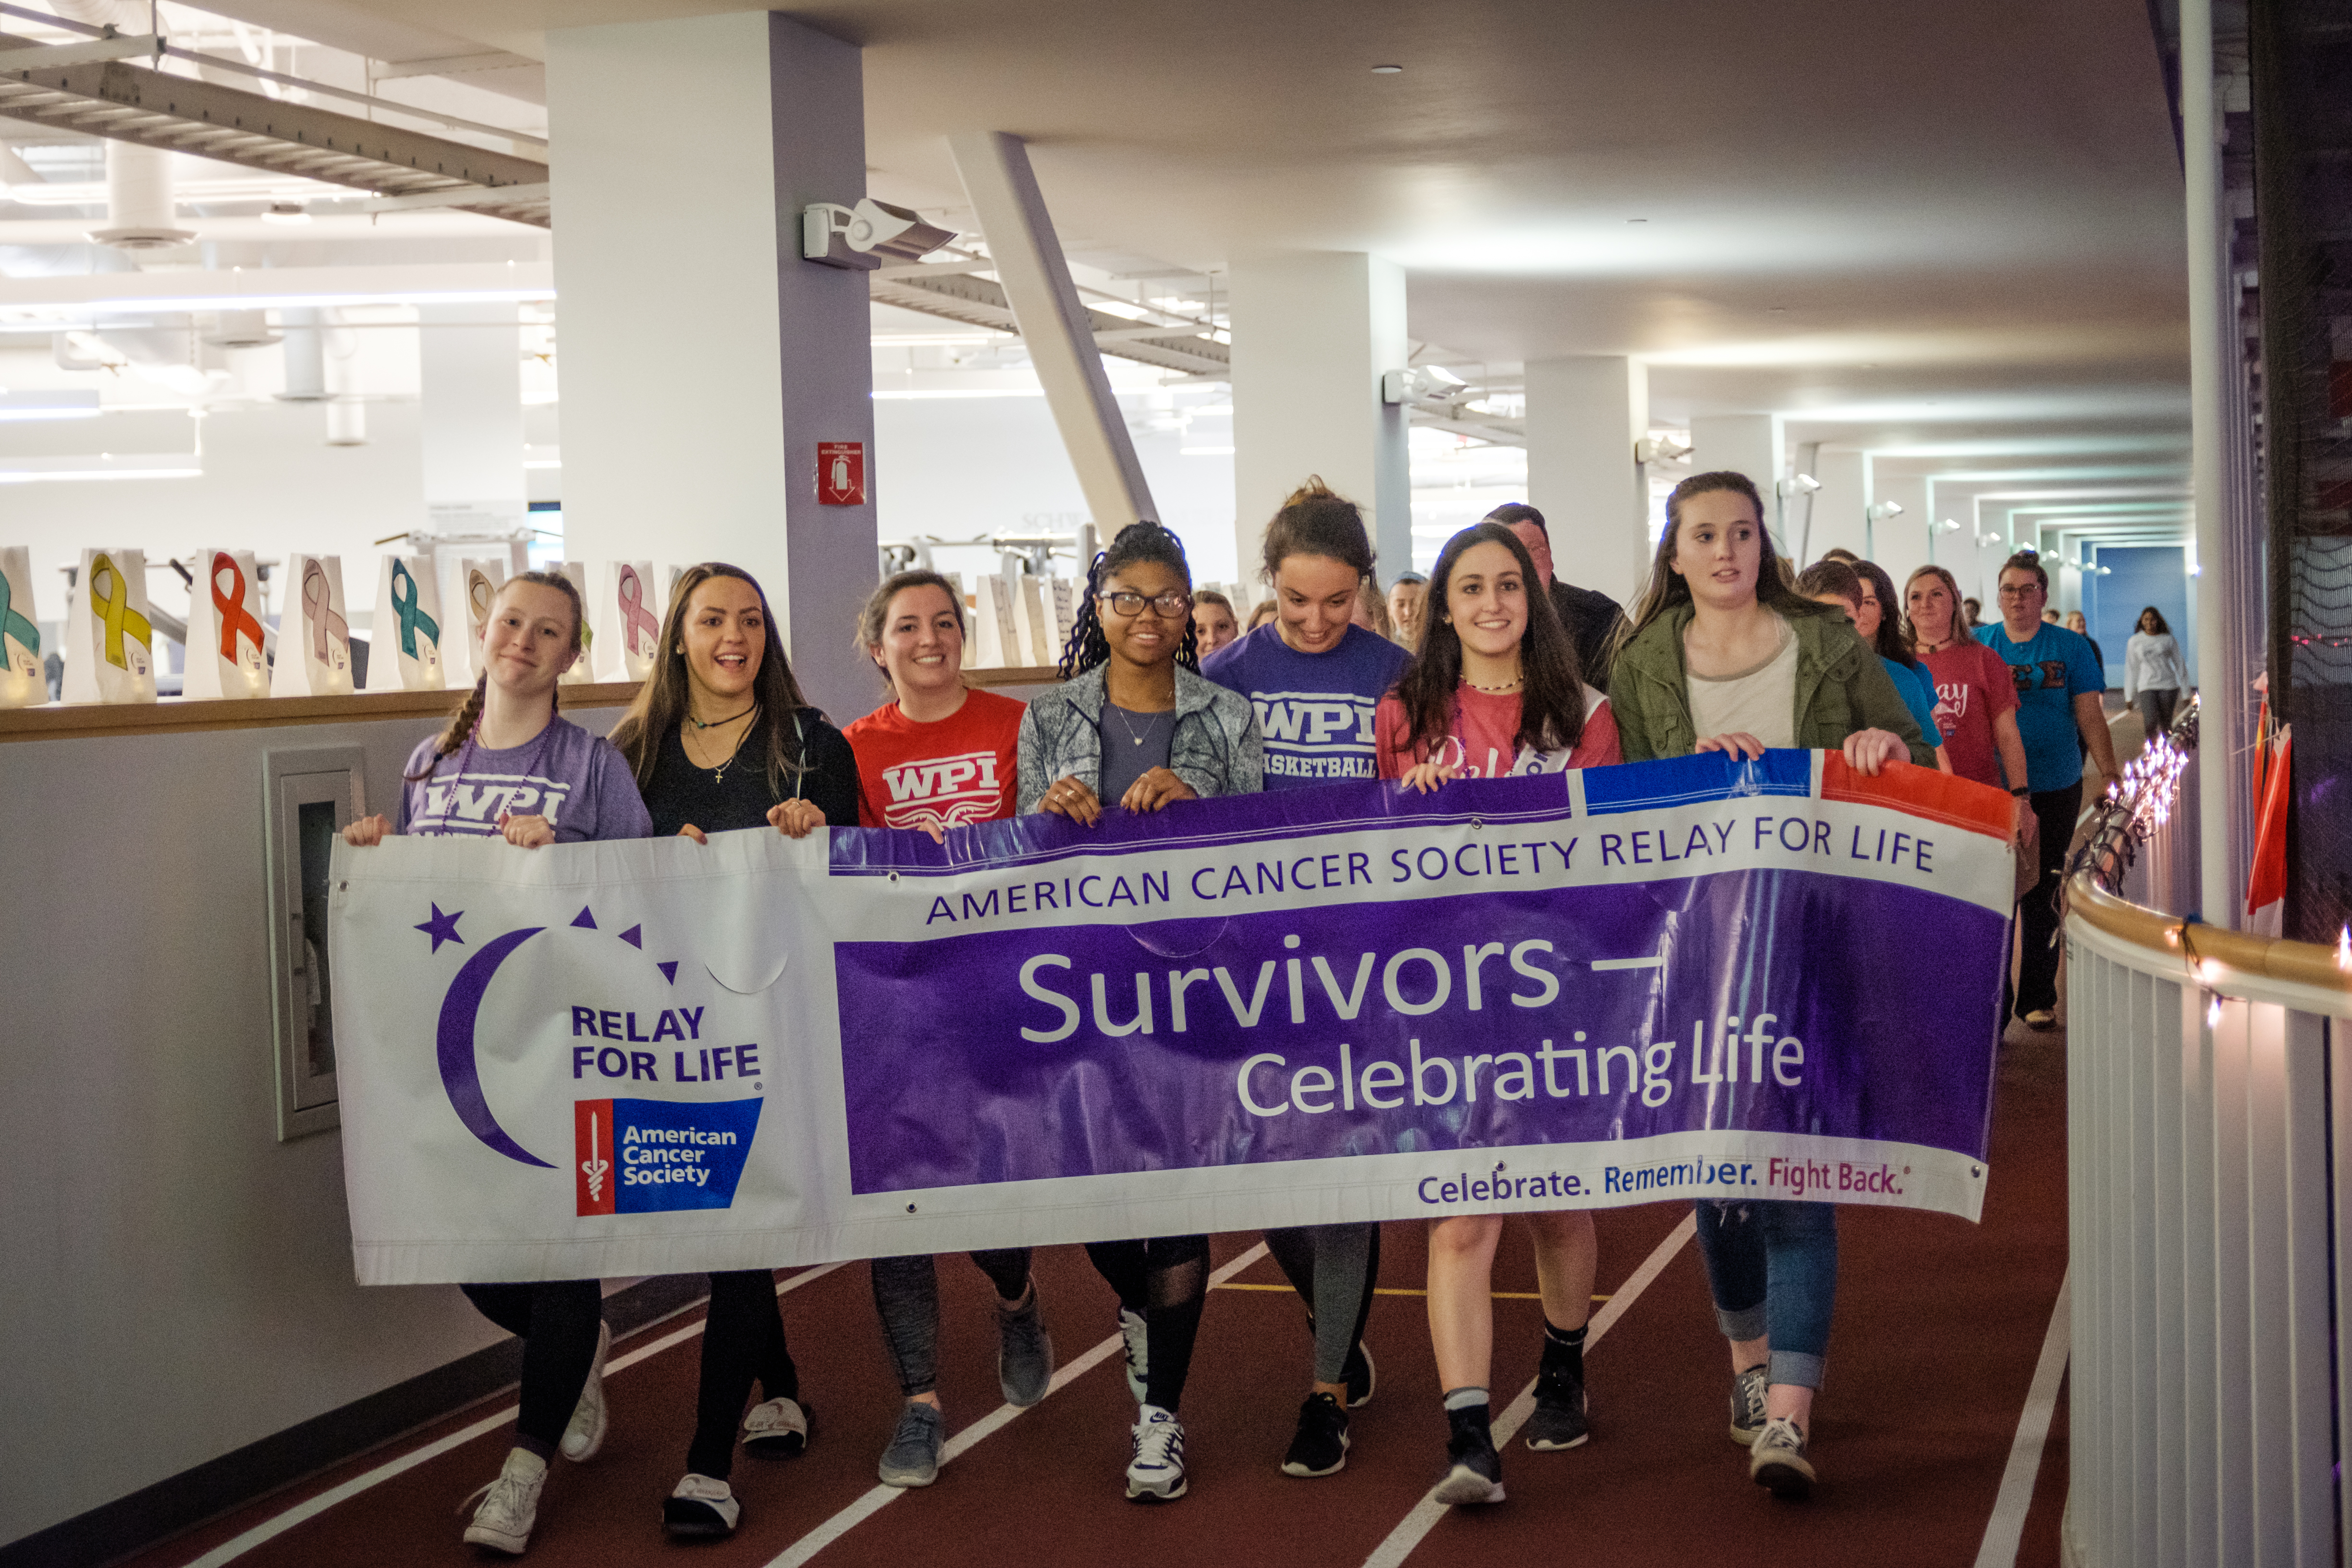 Several students walk around the indoor track together, holding a banner that says "Survivors: Celebrating Life."